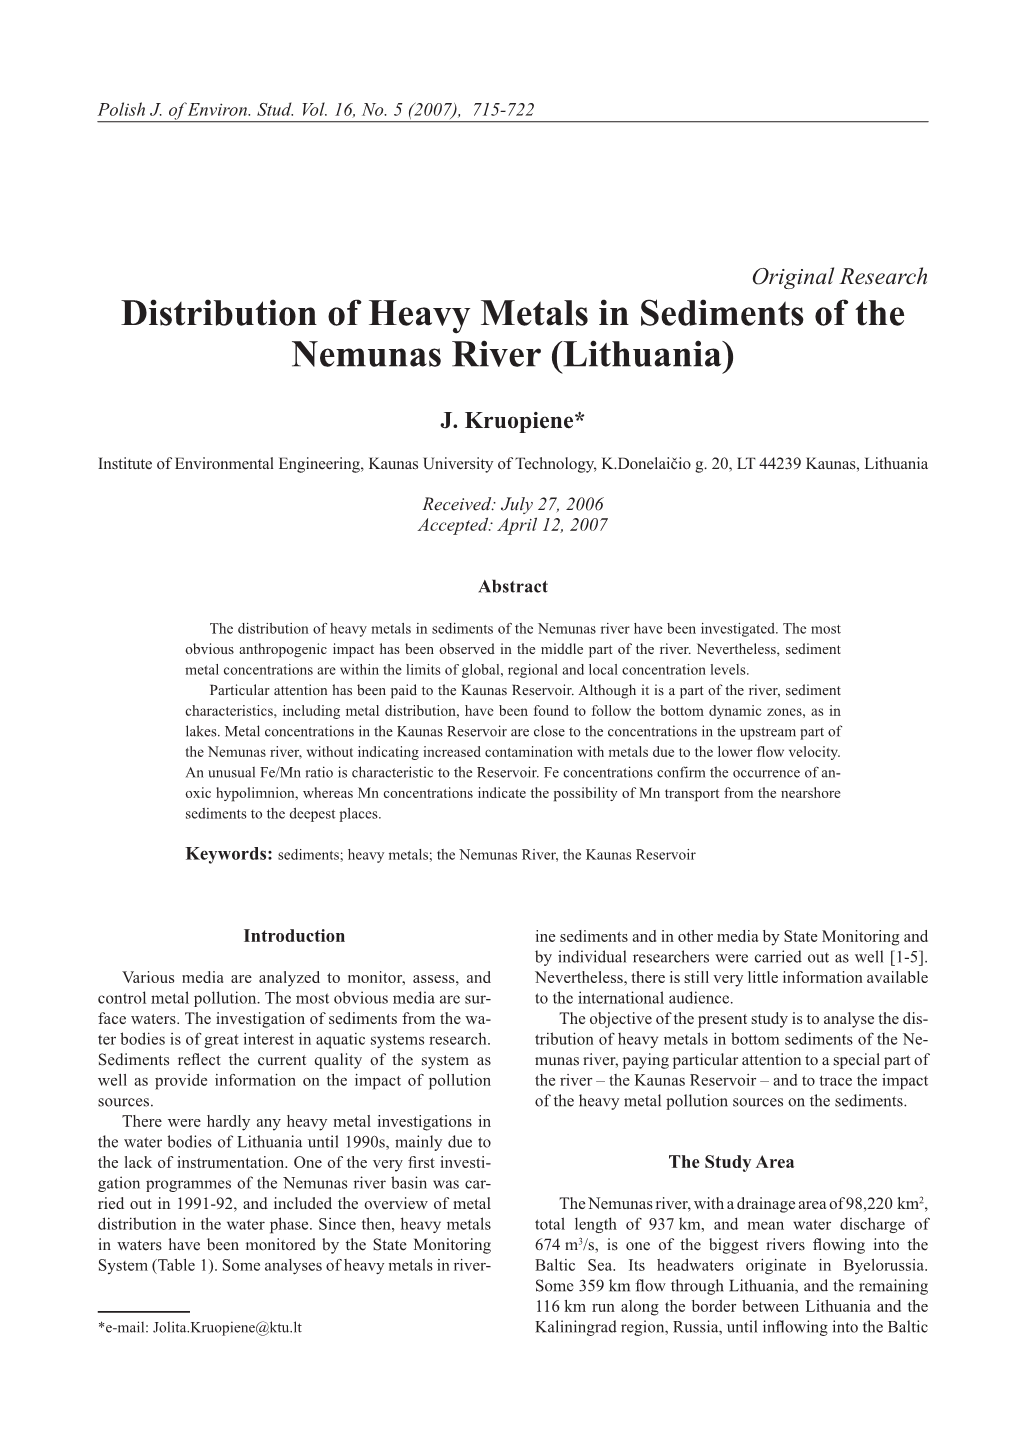 Distribution of Heavy Metals in Sediments of the Nemunas River (Lithuania)